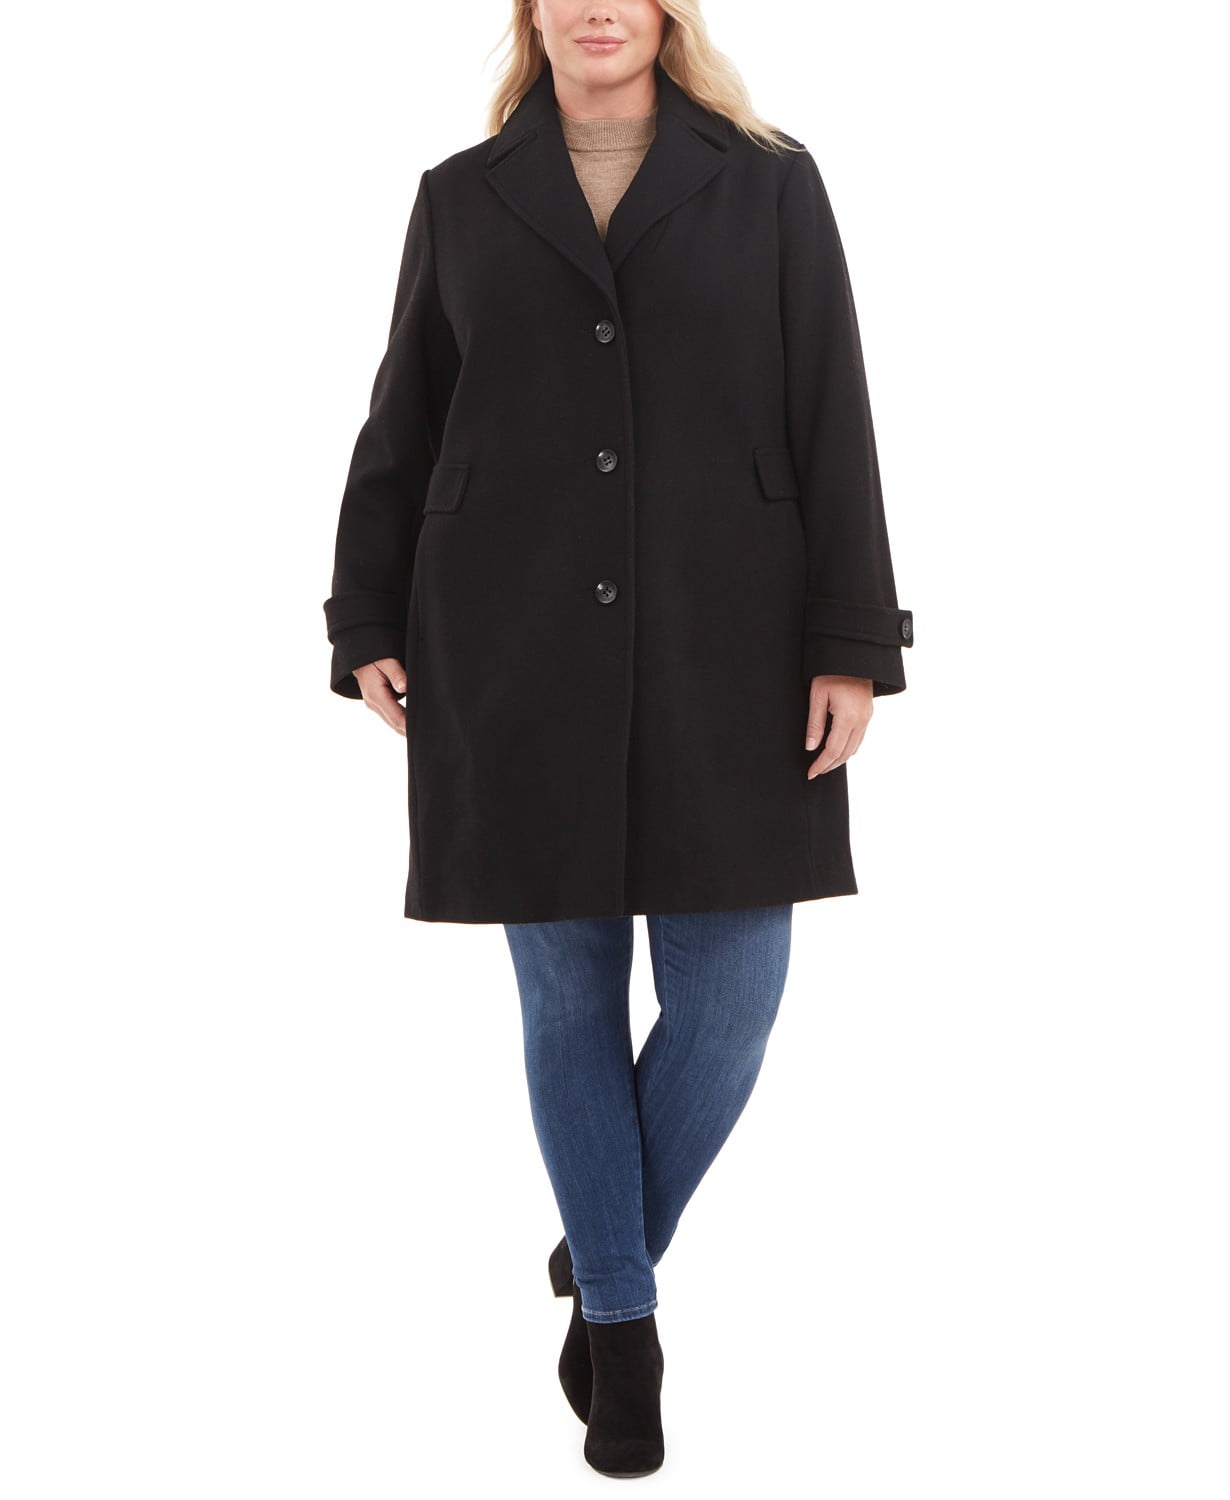 www.couturepoint.com-vince-camuto-womens-plus-size-black-wool-blend-single-breasted-coat